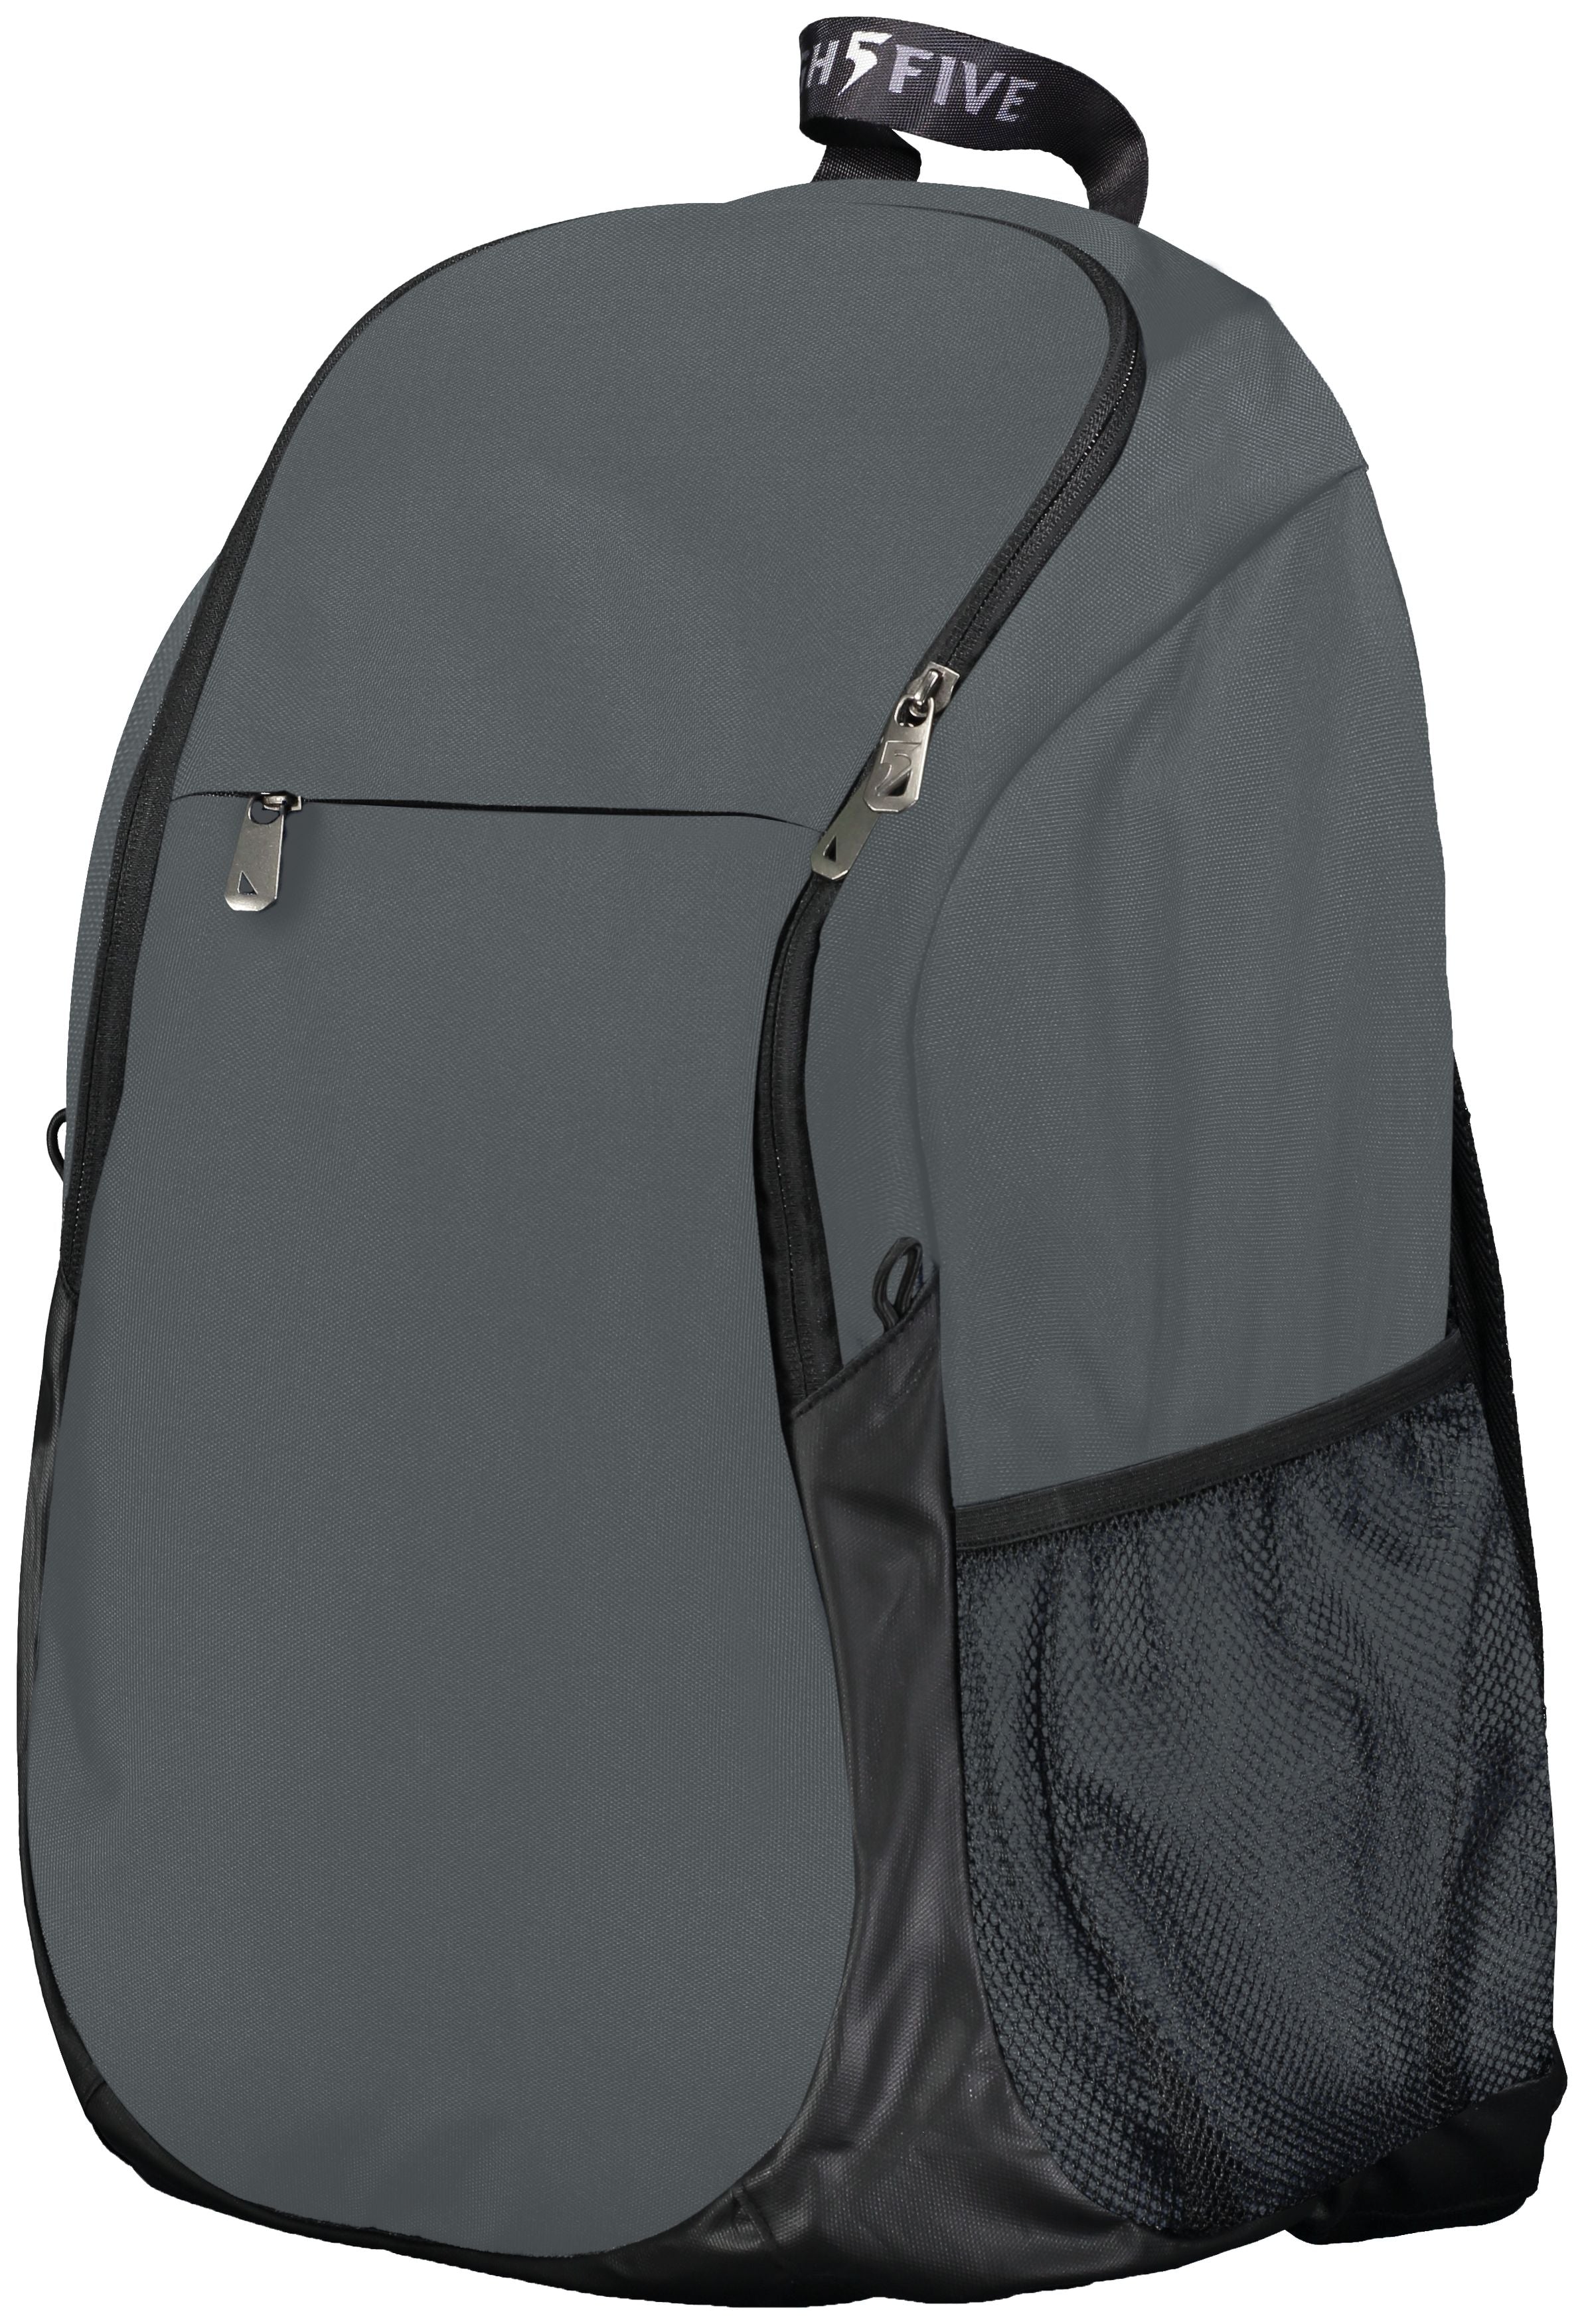 High 5 Free Form Backpack